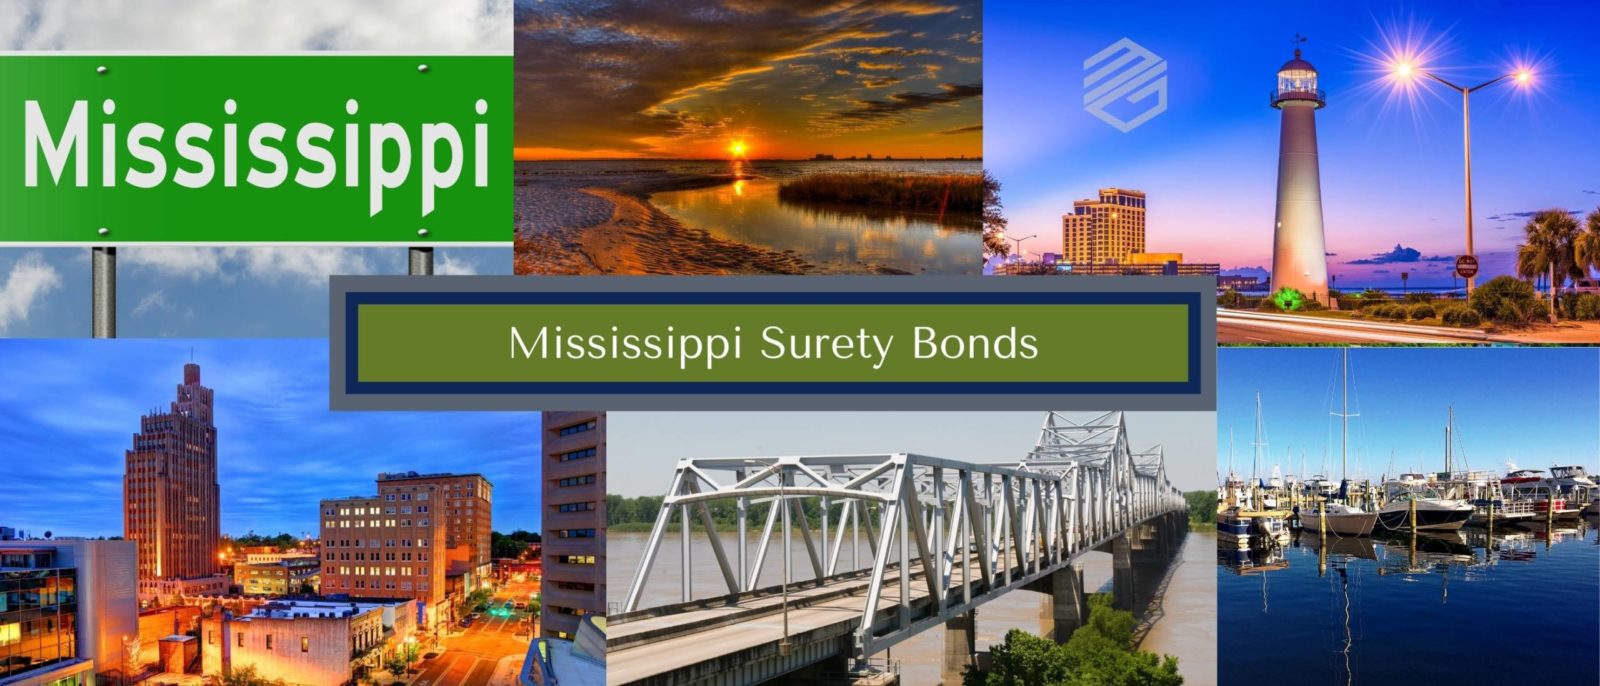 Mississippi Surety Bonds - Six pictures representing the state of Mississippi including Vicksburg, Jackson and a Mississippi sign. A text box with the words, "Mississippi Surety Bonds" in them middle.